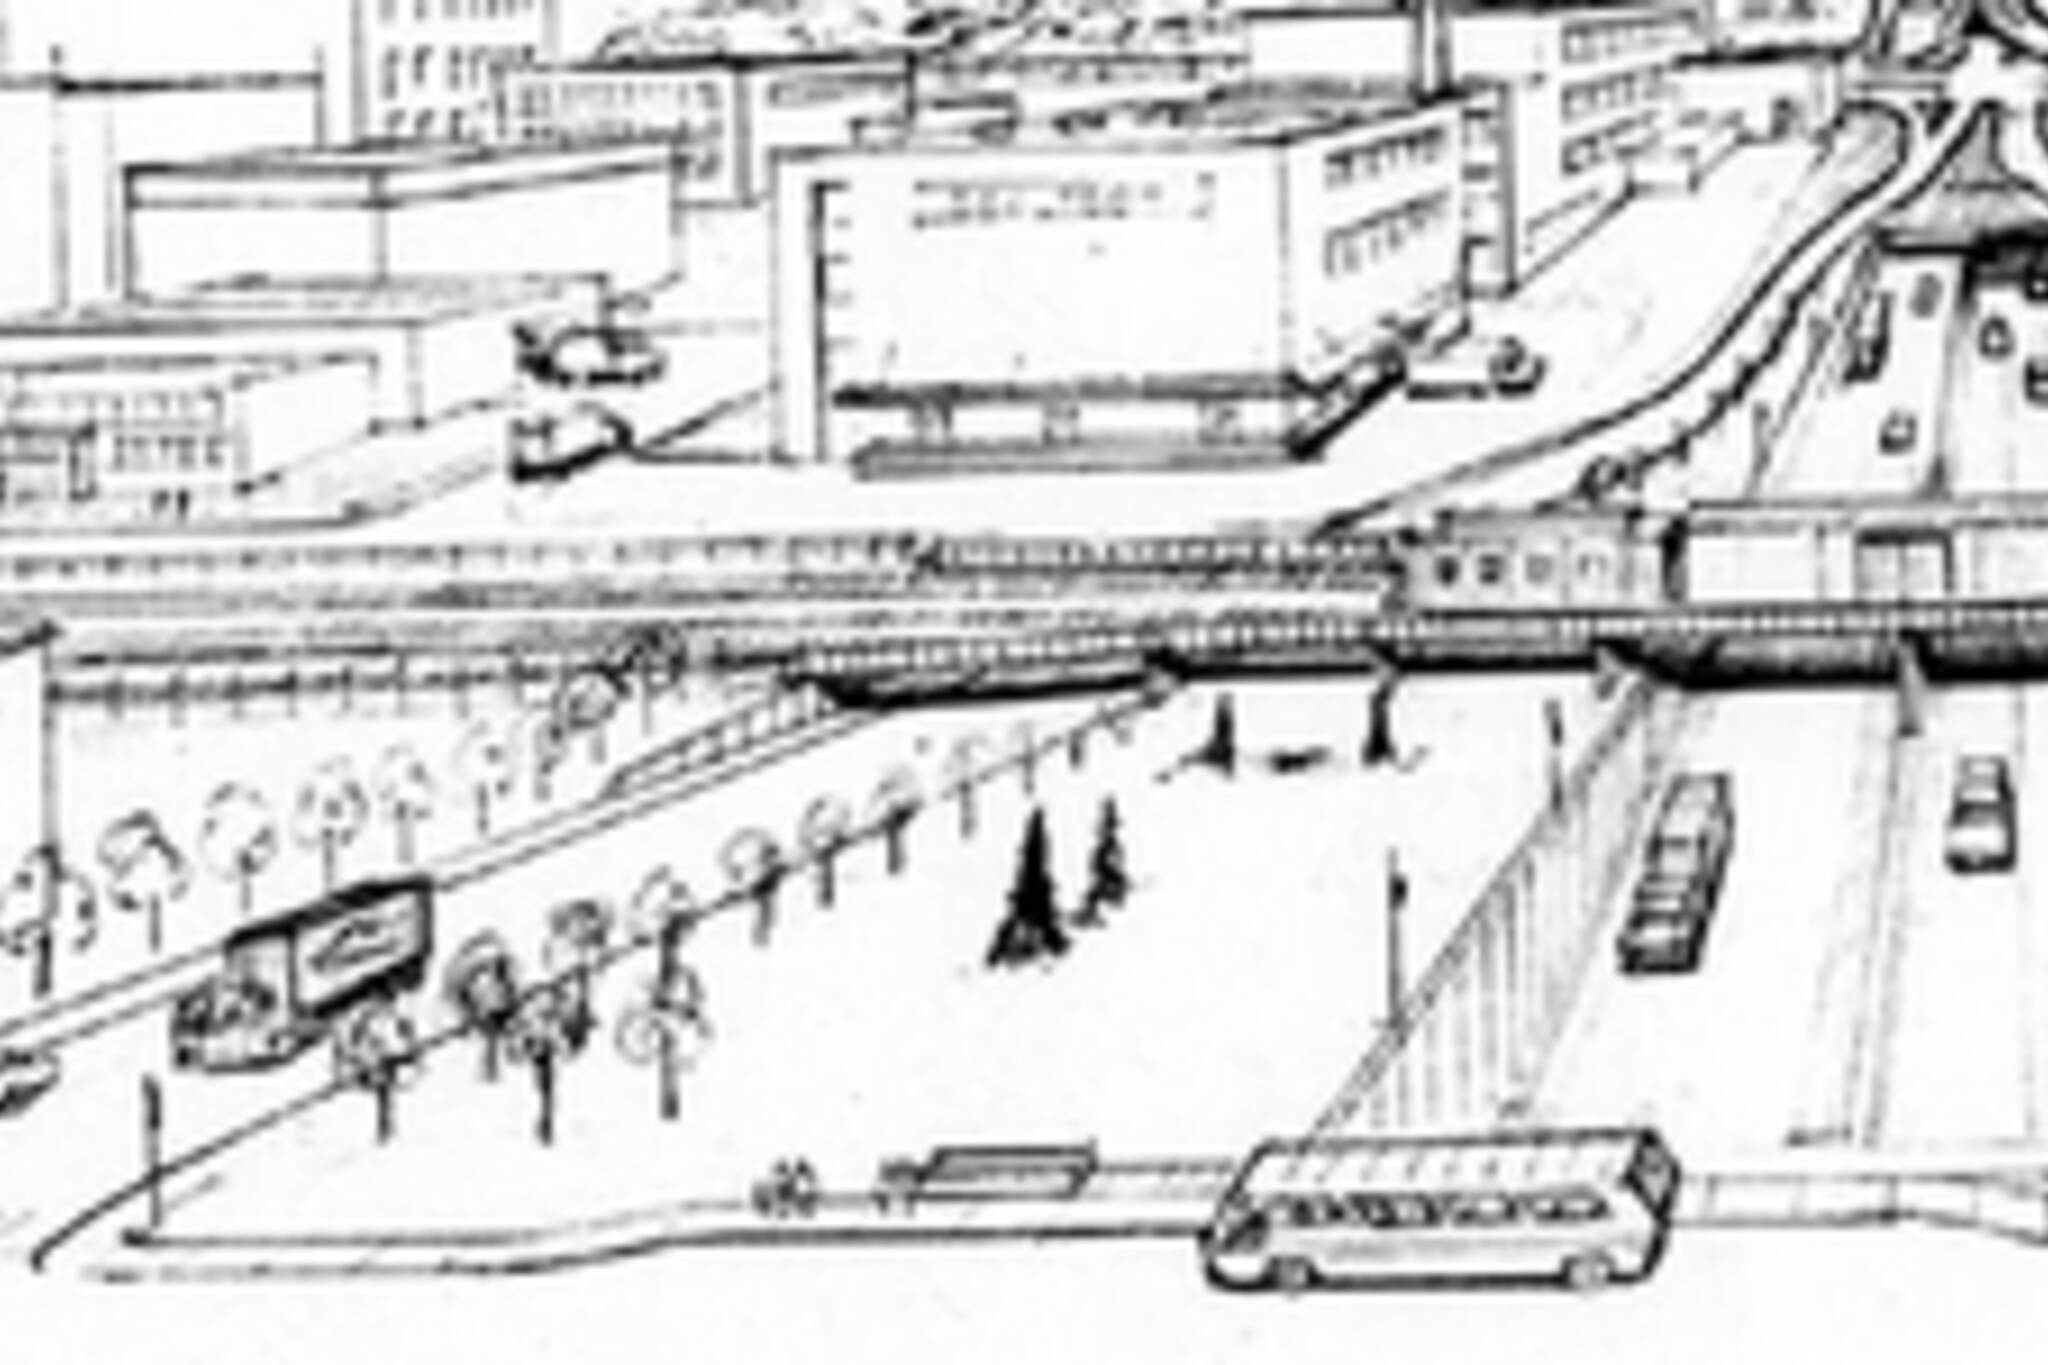 35 Years Without the Spadina Expressway